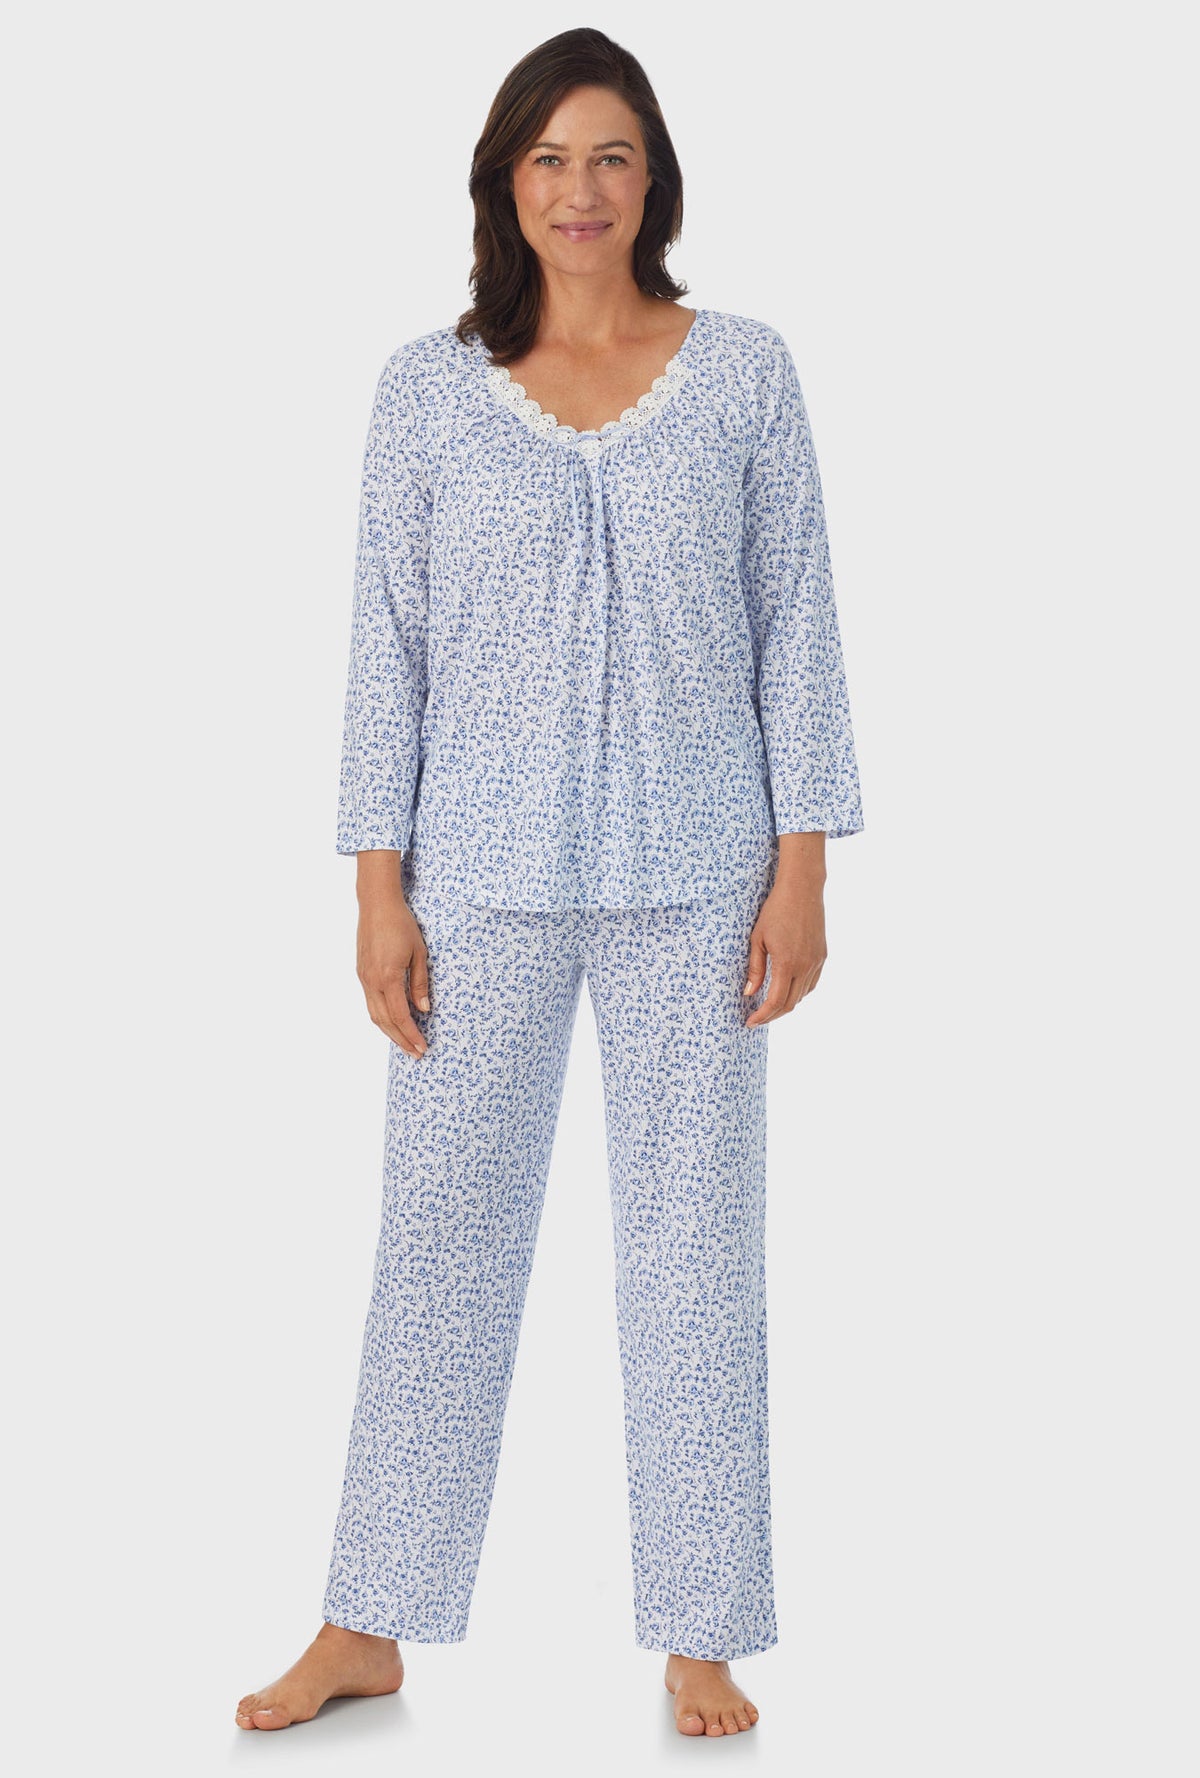 A lady wearing white Long Sleeve 3/4 Sleeve Long Pant PJ Set with Dusty Blue  print